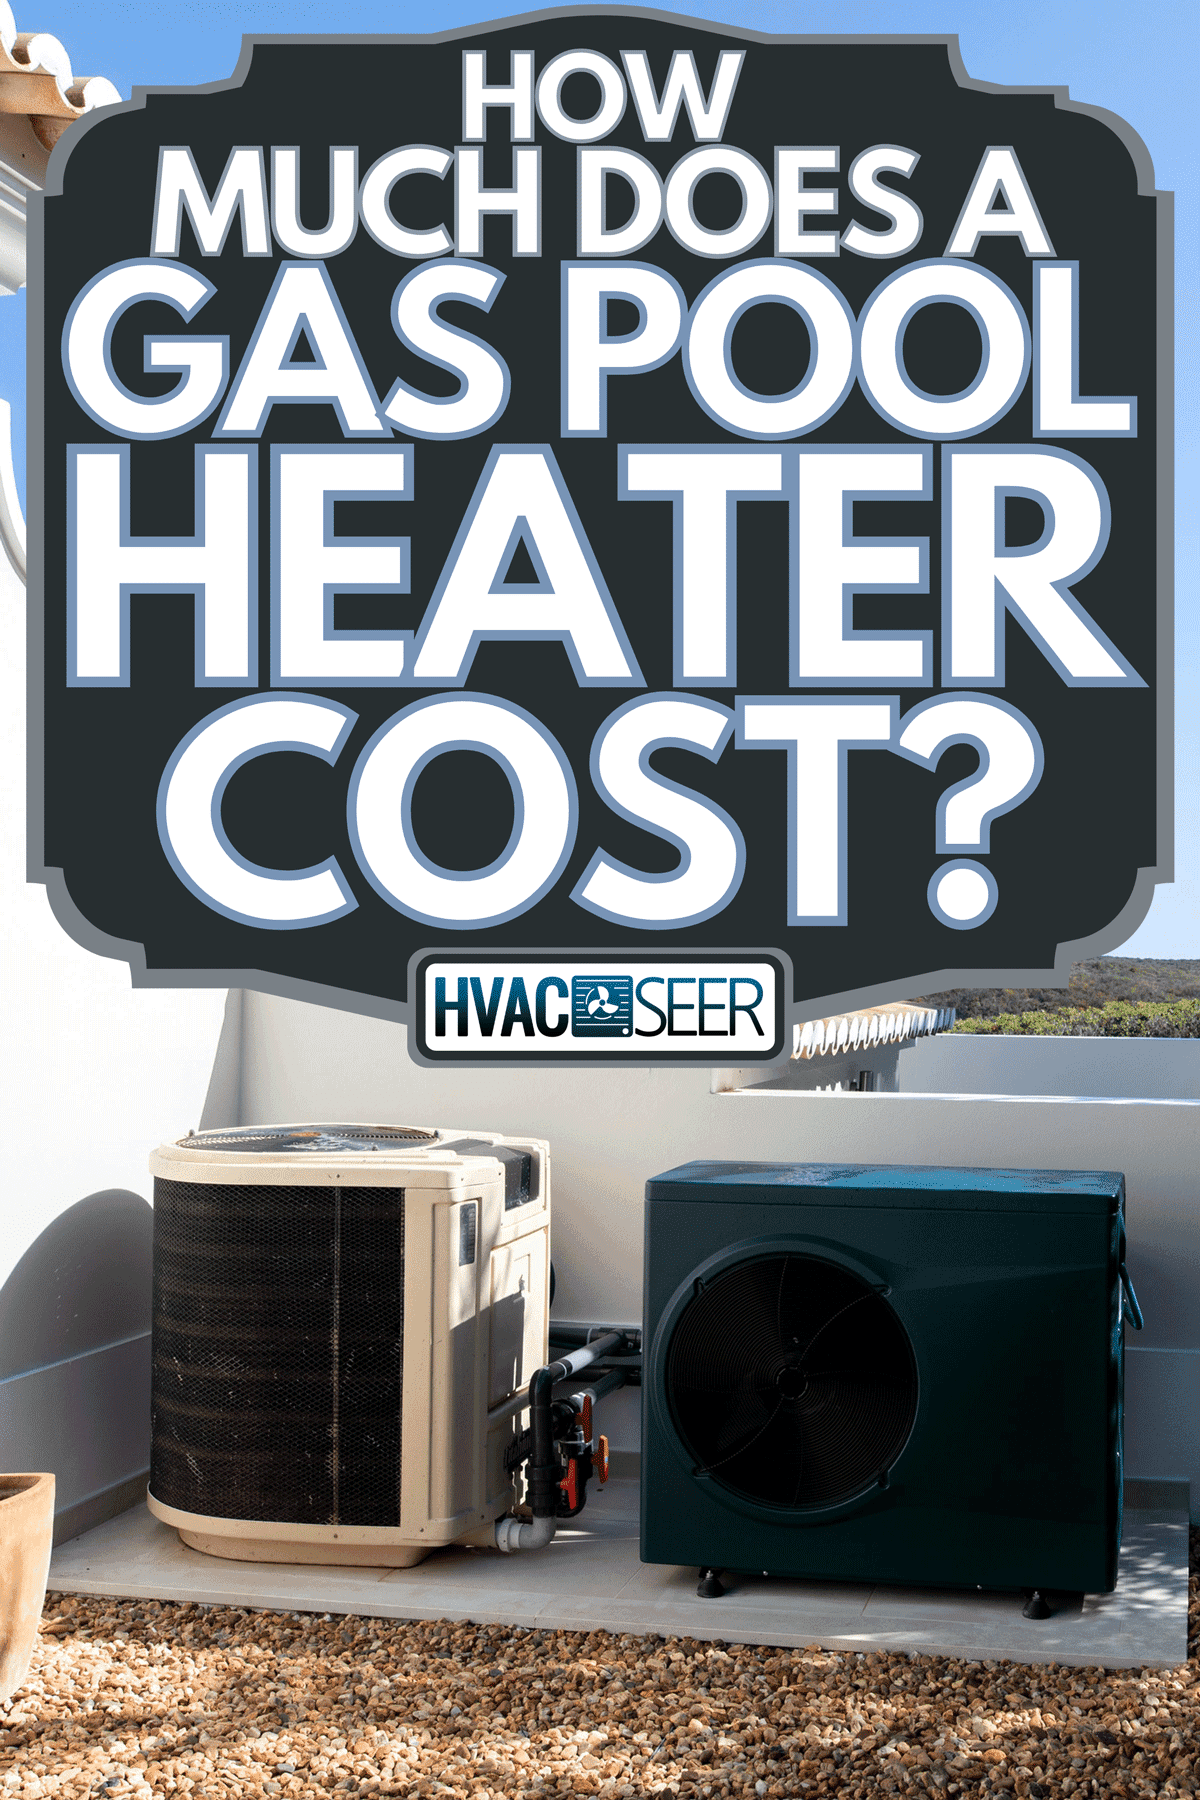 Two pool heaters at the back of the house, How Much Does A Gas Pool Heater Cost?